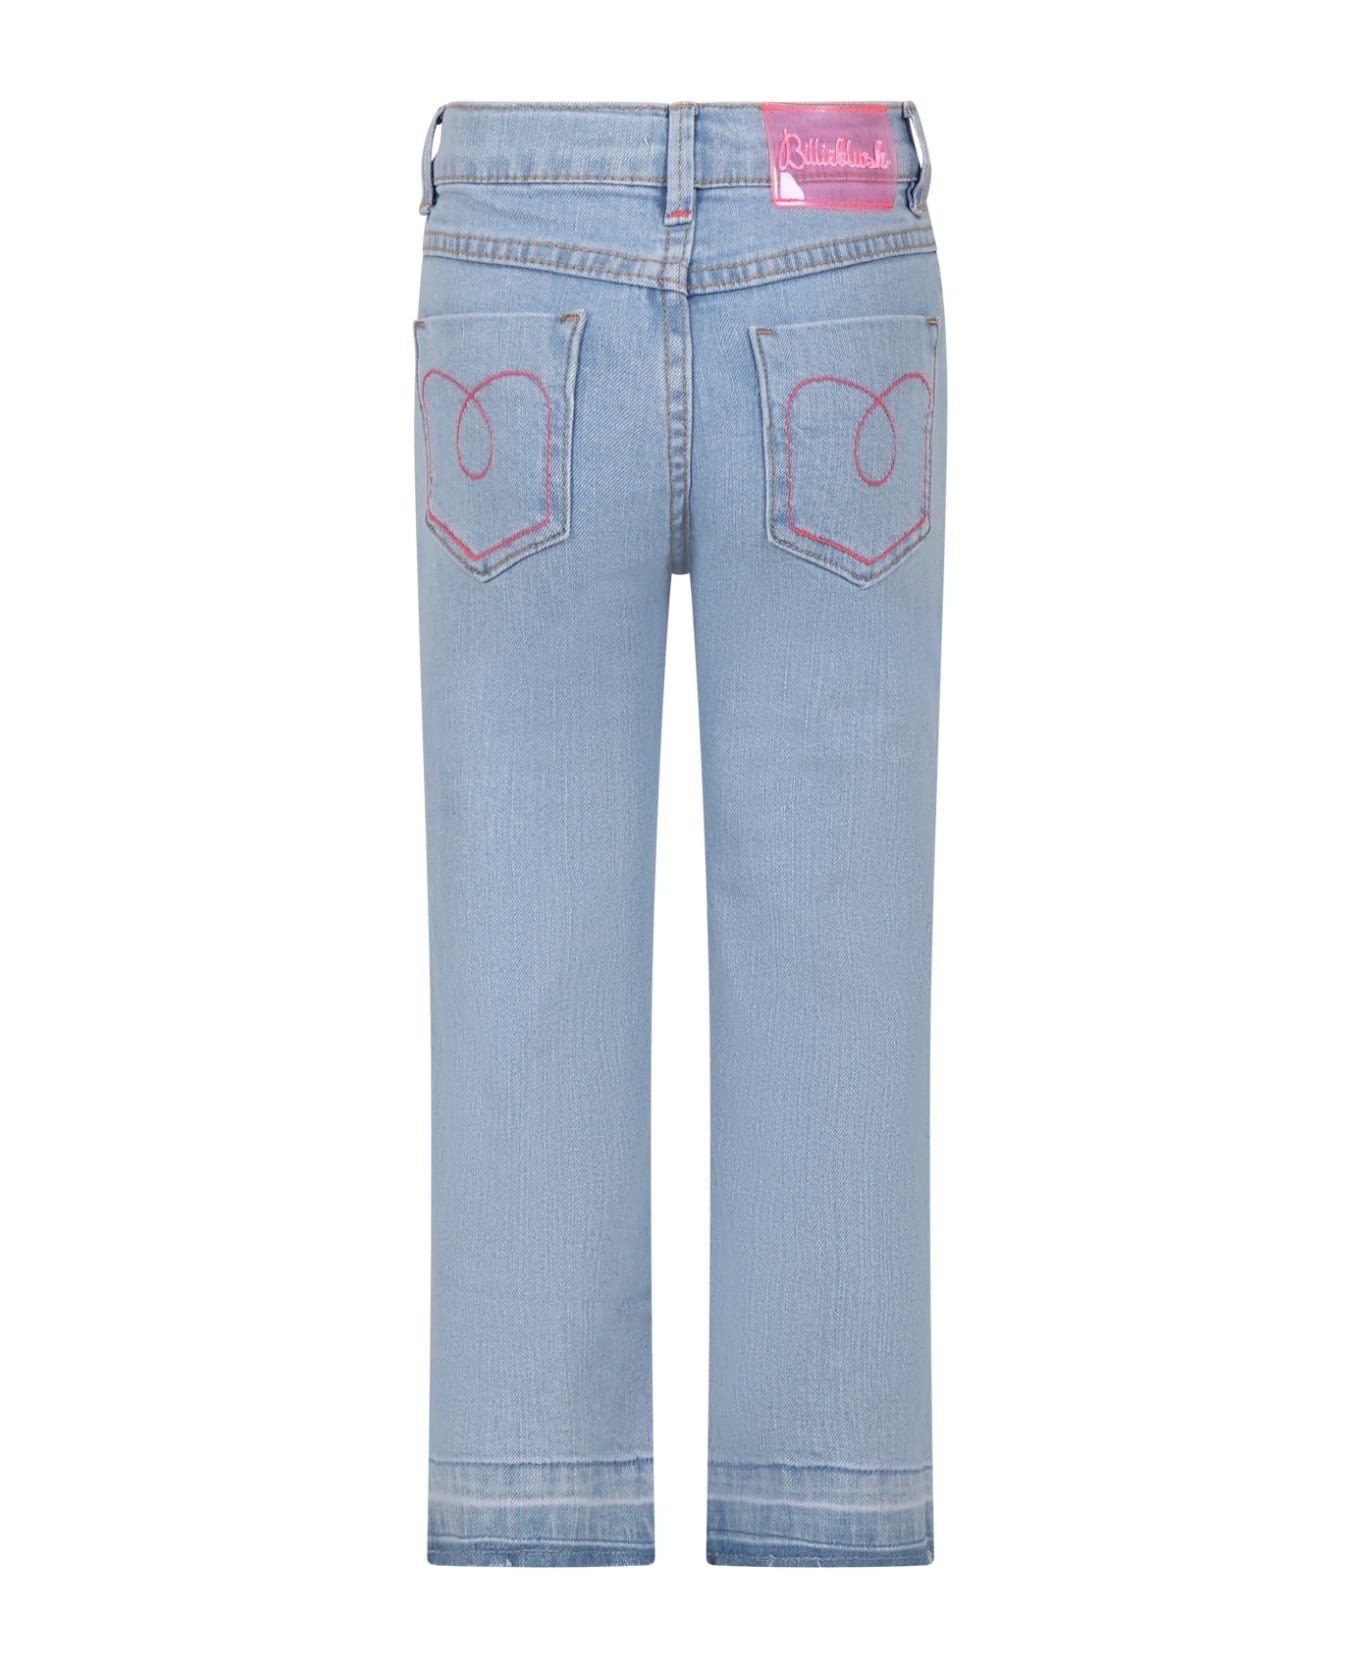 Billieblush Denim Jeans For Girl With Sequin Patches - Denim ボトムス